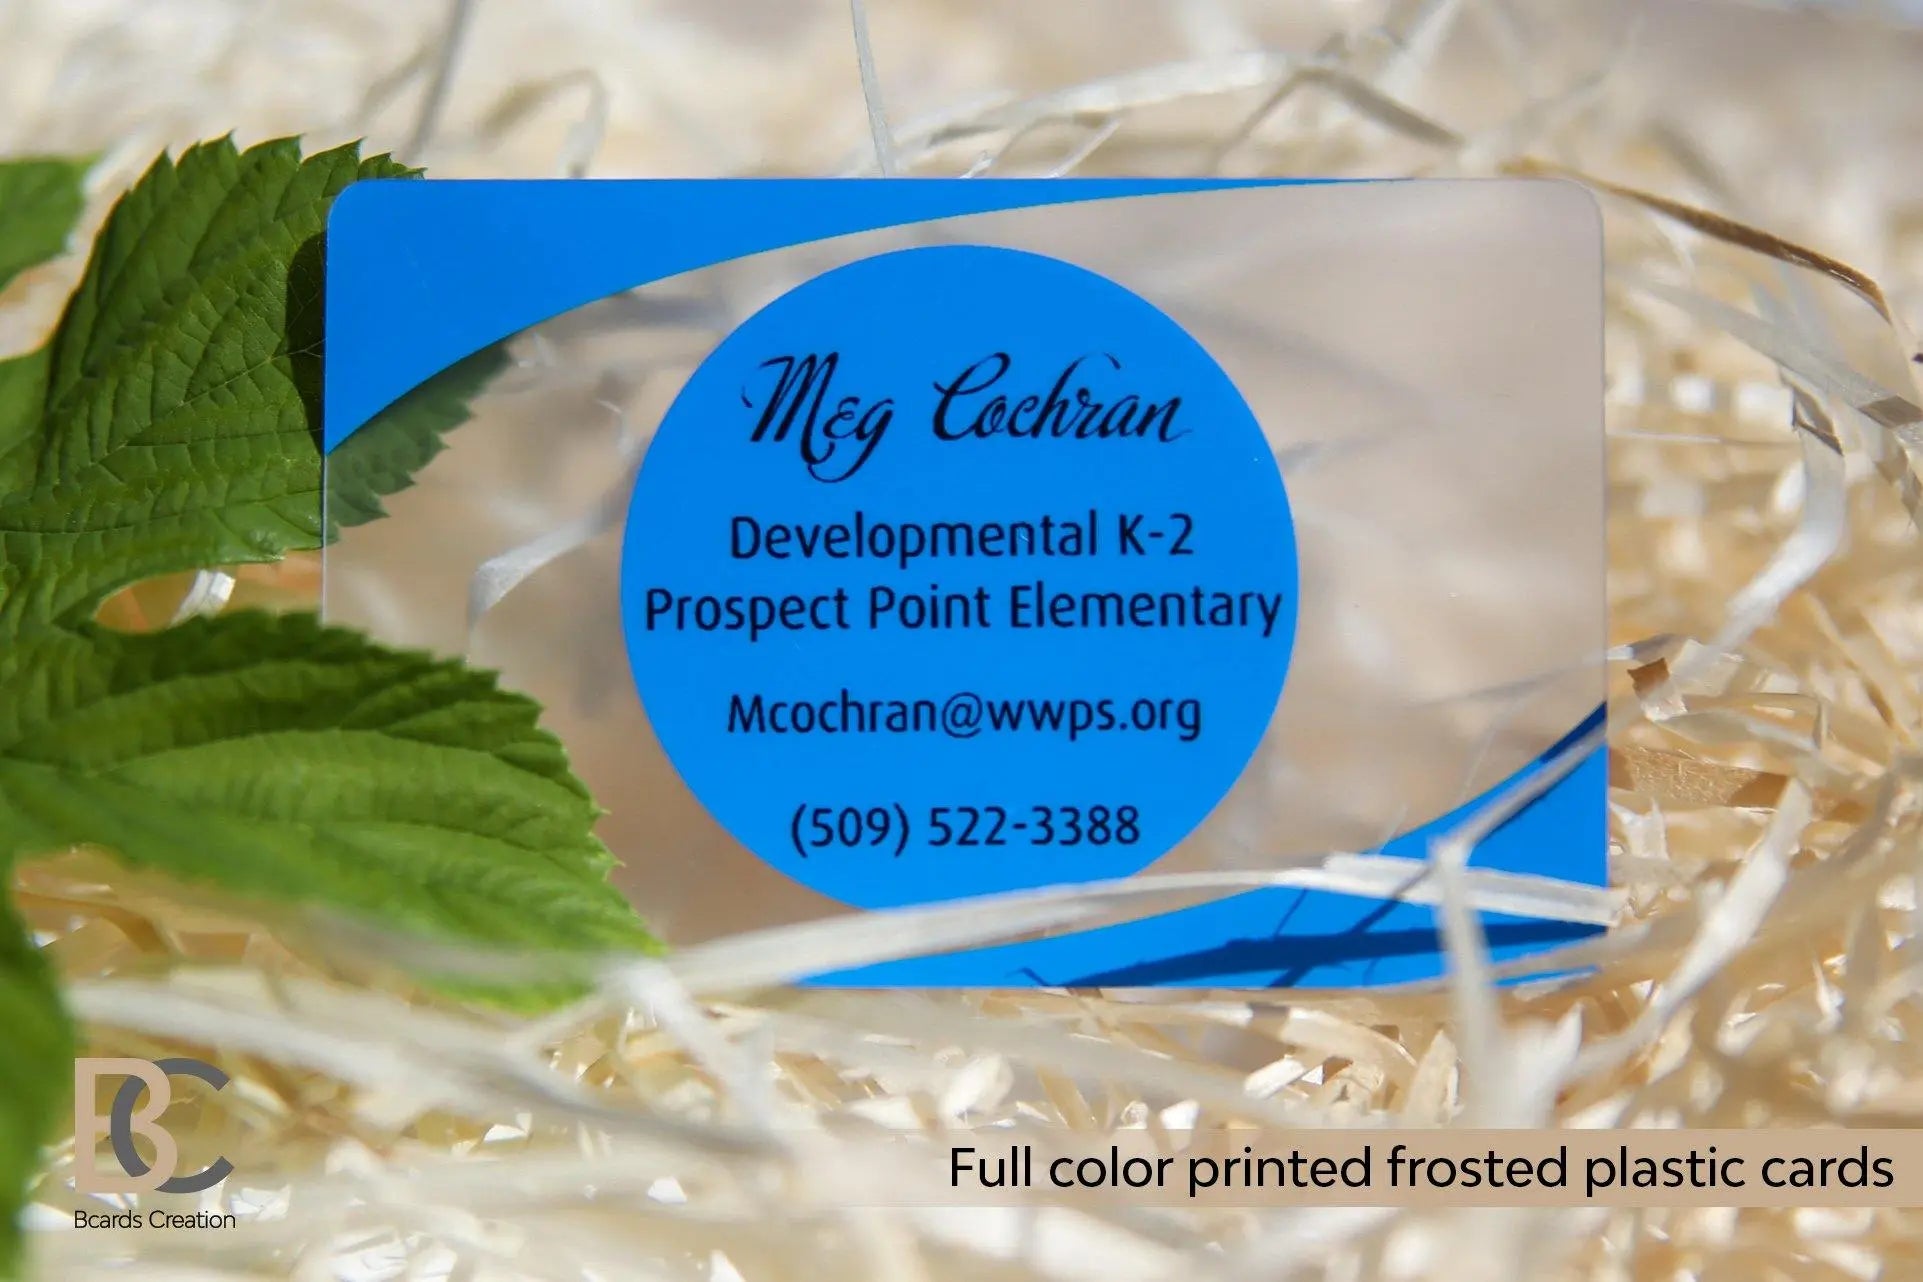 Frosted Transparent Plastic Business Cards | Full-color printing Frosted Transparent Plastic Business Cards with full-color printing Business_cards, Frosted_Card, Full Color Print, Plastic_Cards Transparent Business Cards